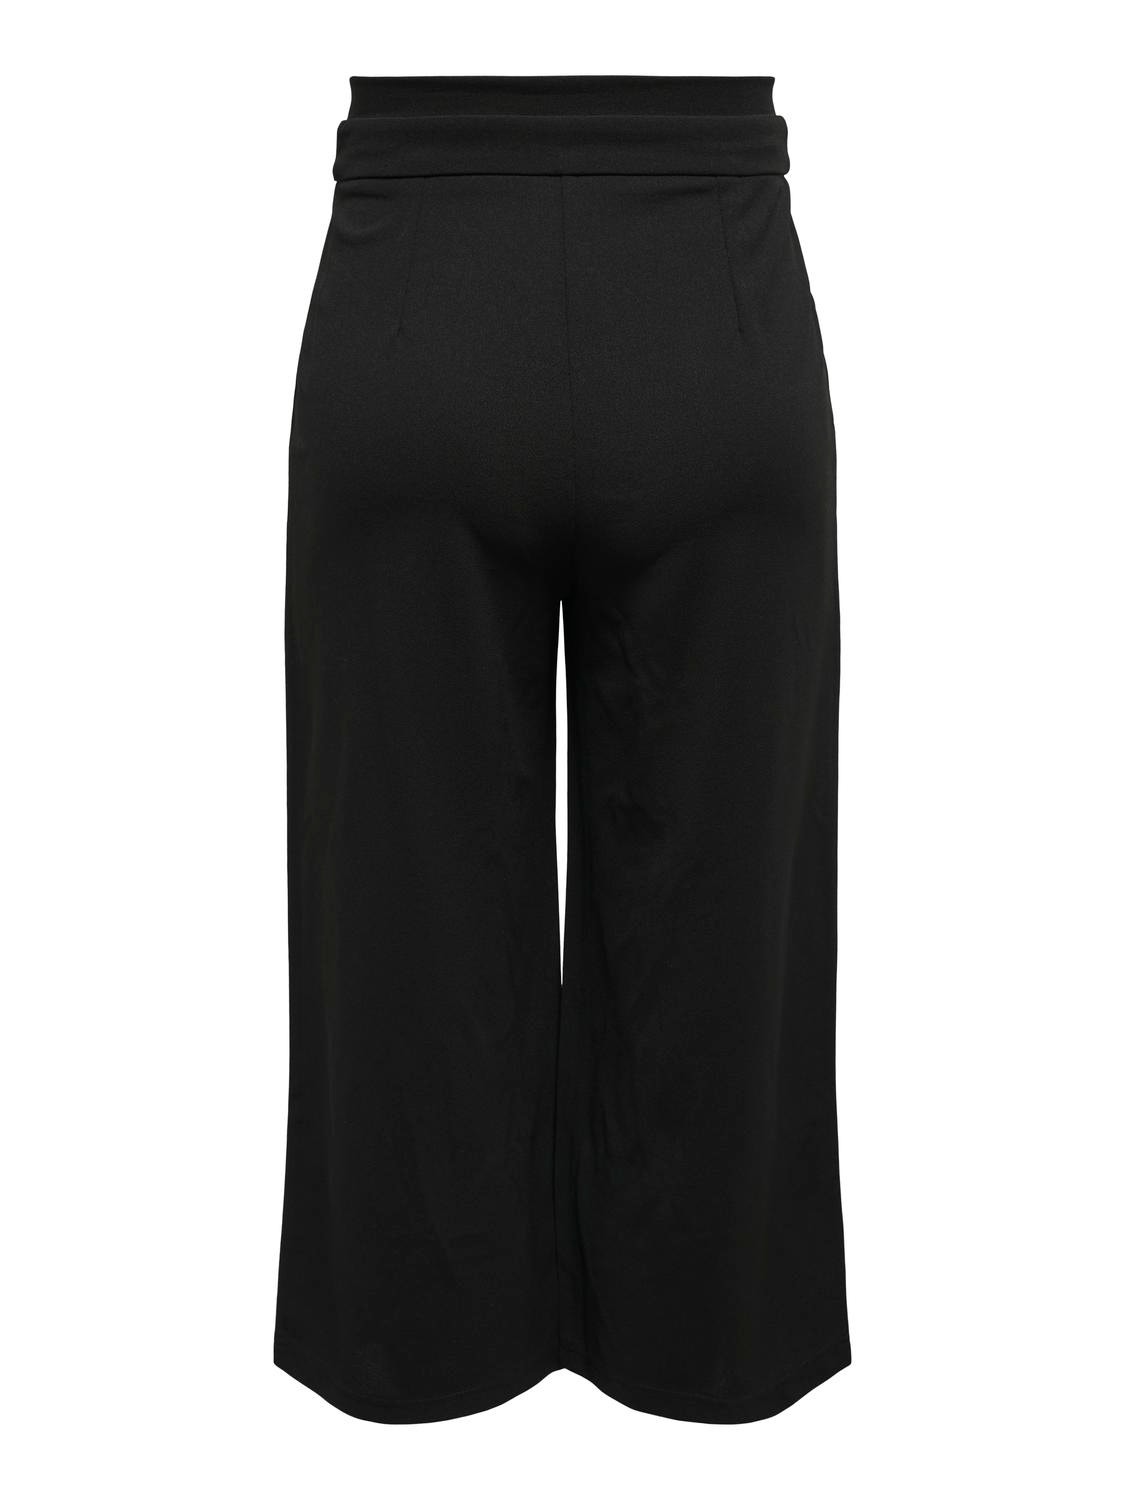 ONLY Culotte Trousers -Black - 15205538